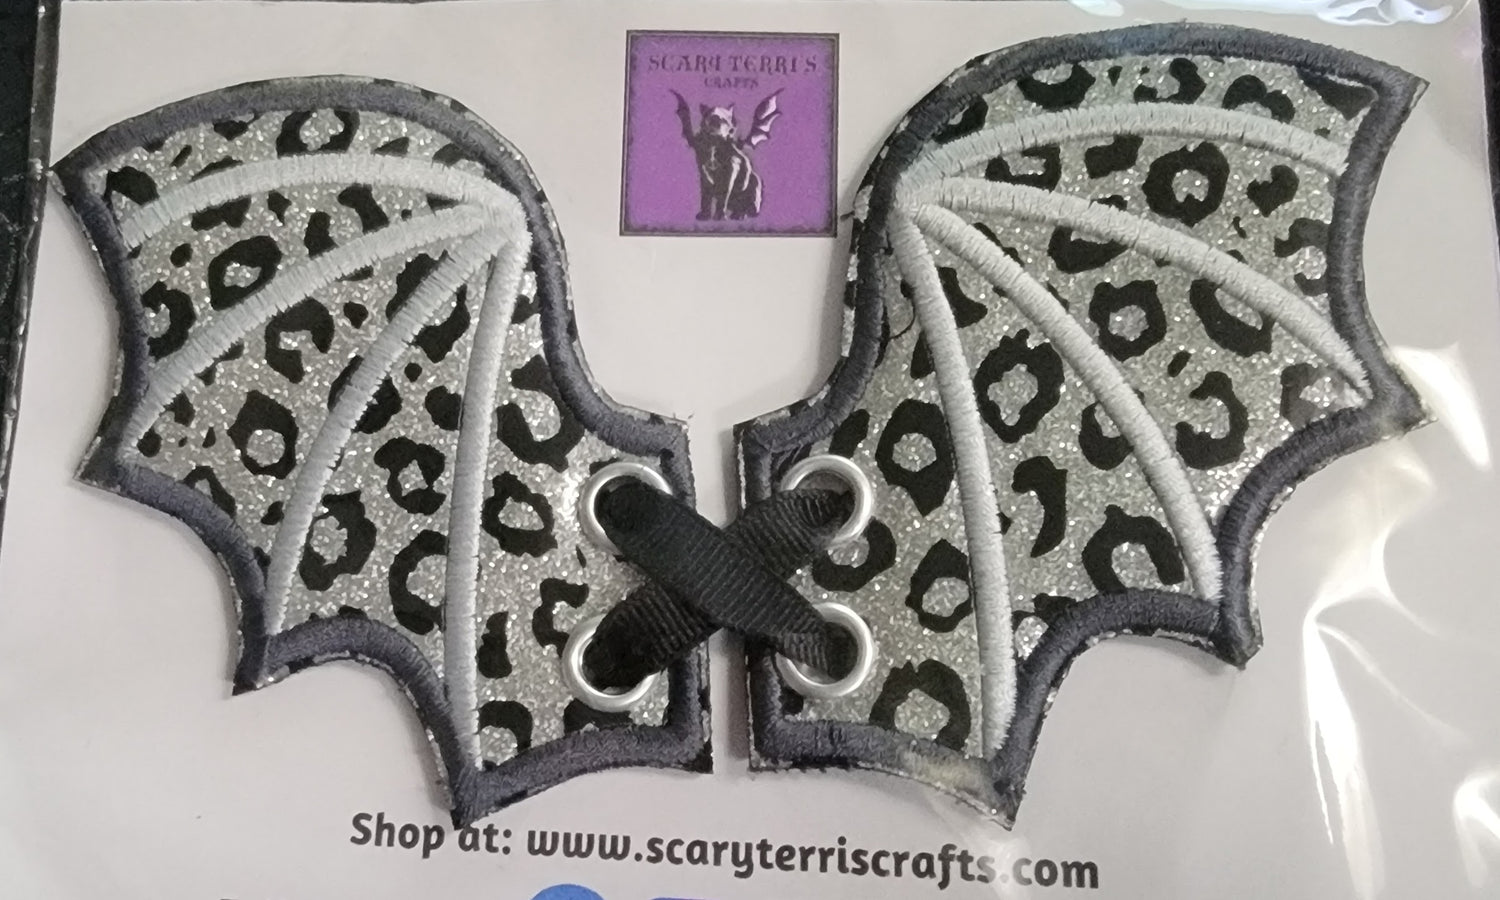 Horror/Spooky Inspired – tagged coffin purse – Scary Terri's Crafts